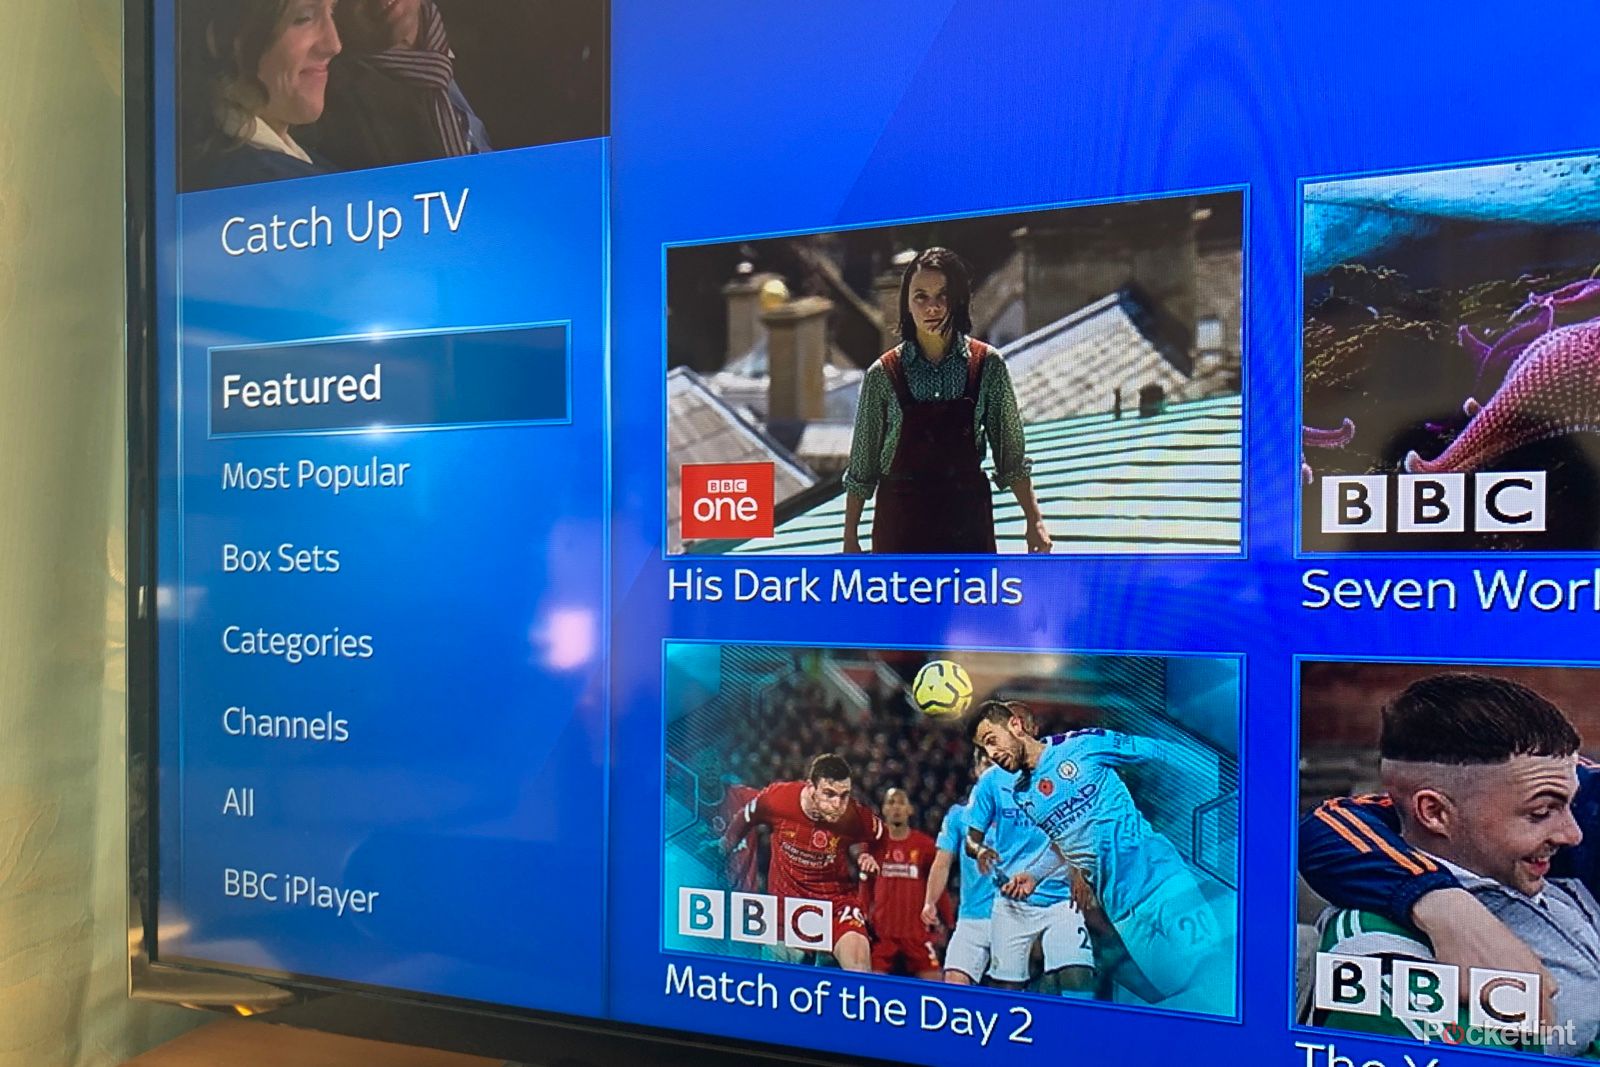 Full BBC iPlayer finally comes to Sky Q image 2